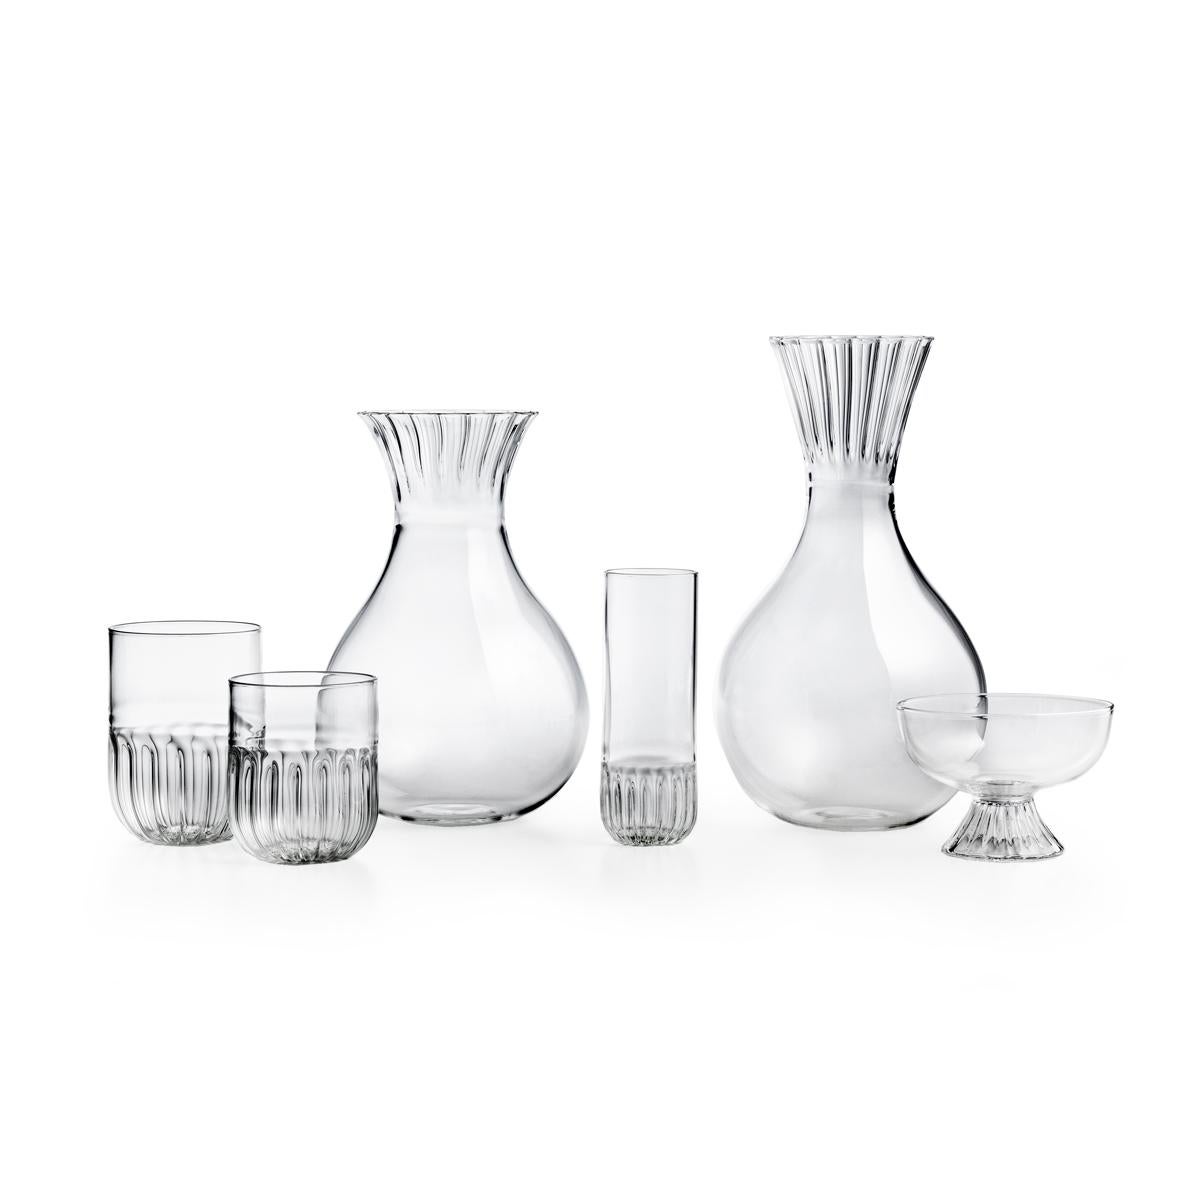 High carafe in mouth blown glass. The routine collection is a glassware family designed by Matteo Cibic, who define it as “an essential collection for a smart daily life”. All the pieces of Routine are handcrafted and feature a soft plissé motif at